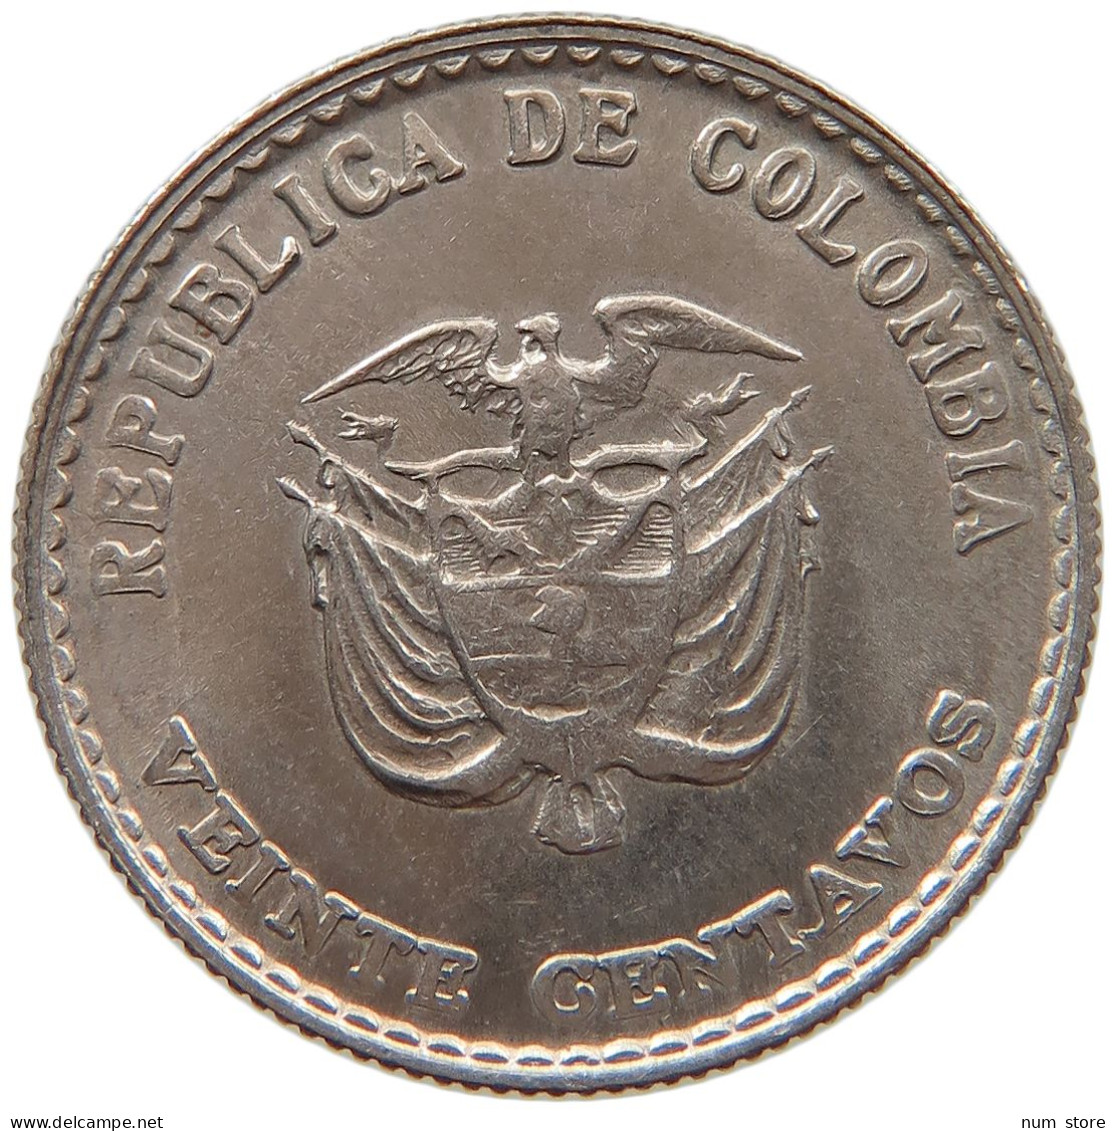 COLOMBIA 20 CENTAVOS 1965  #s030 0151 - Colombia